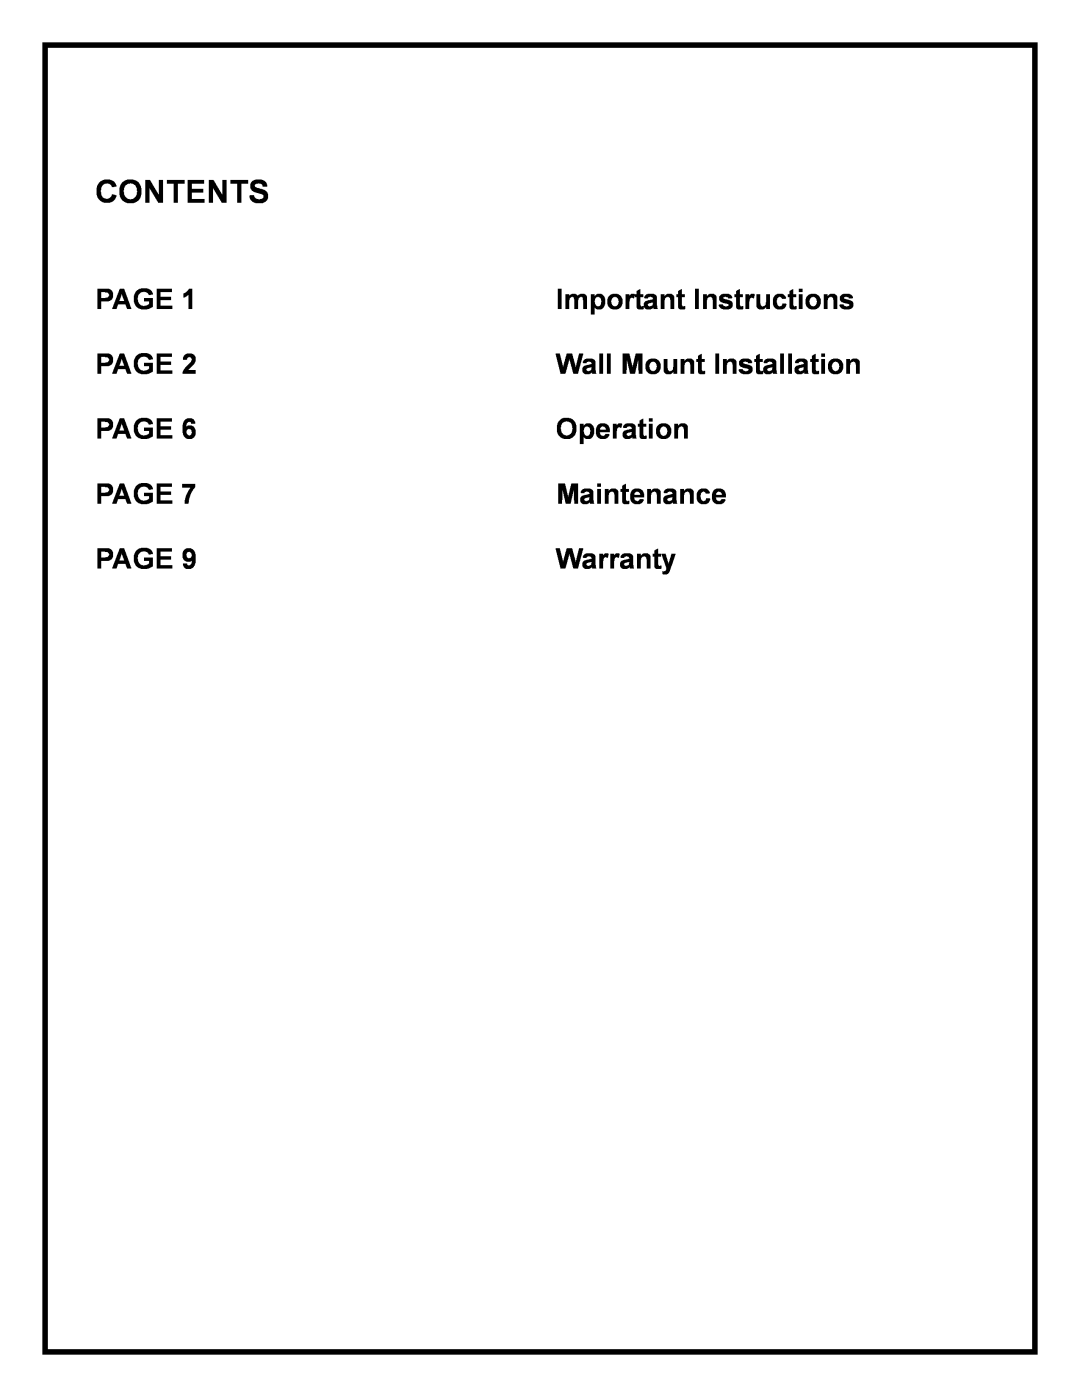 Dimplex EWM-SS manual Contents, Page, Important Instructions, Wall Mount Installation, Operation, Maintenance, Warranty 